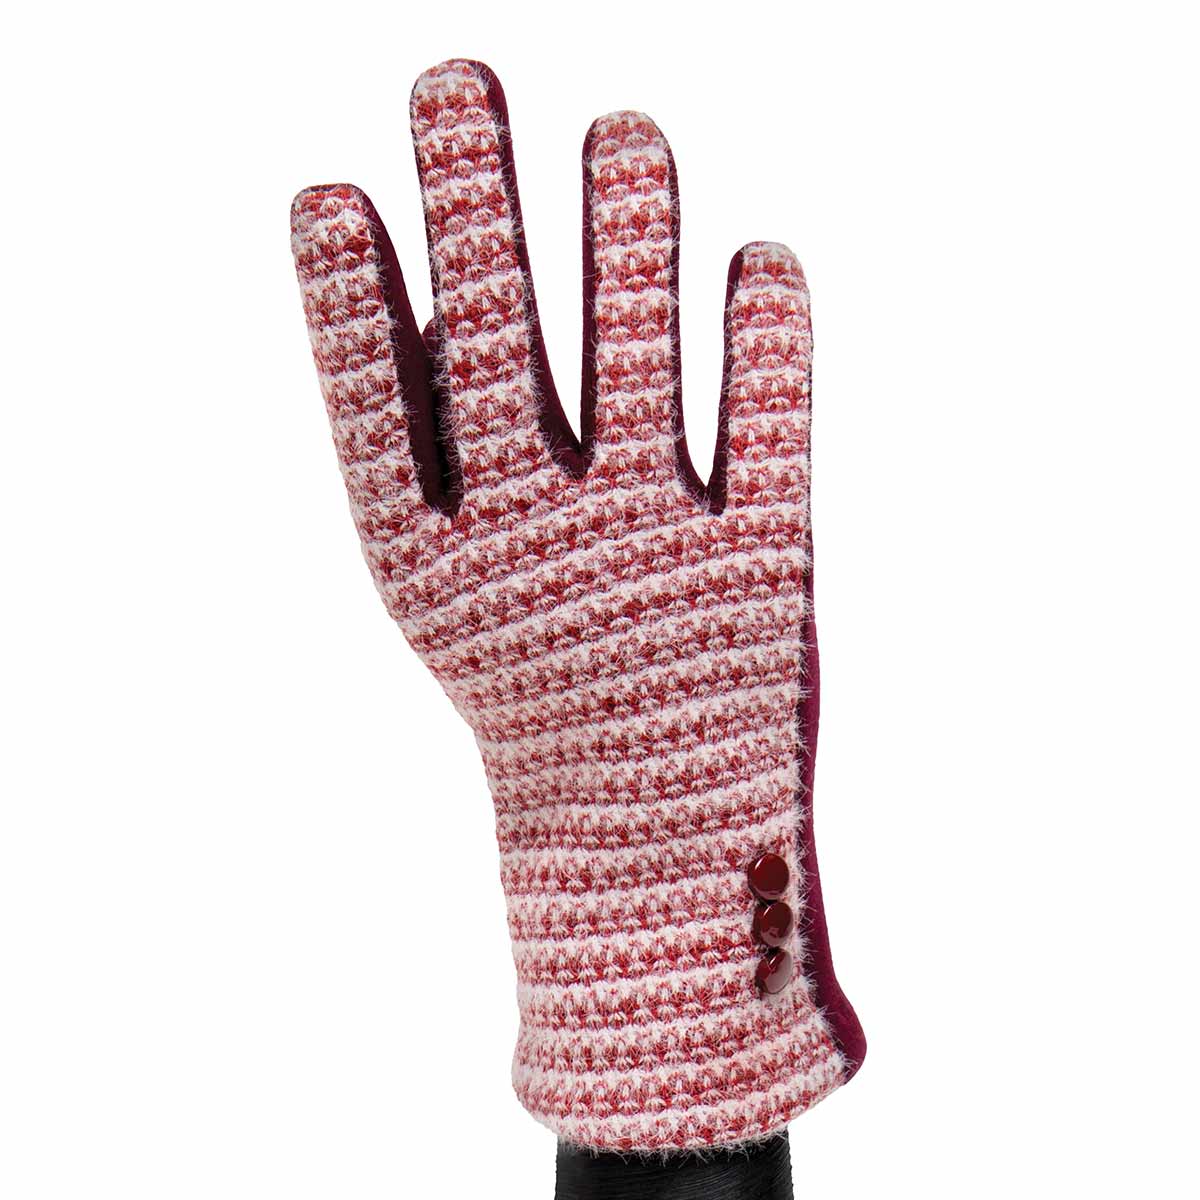 Burgundy Knit Gloves with Buttons